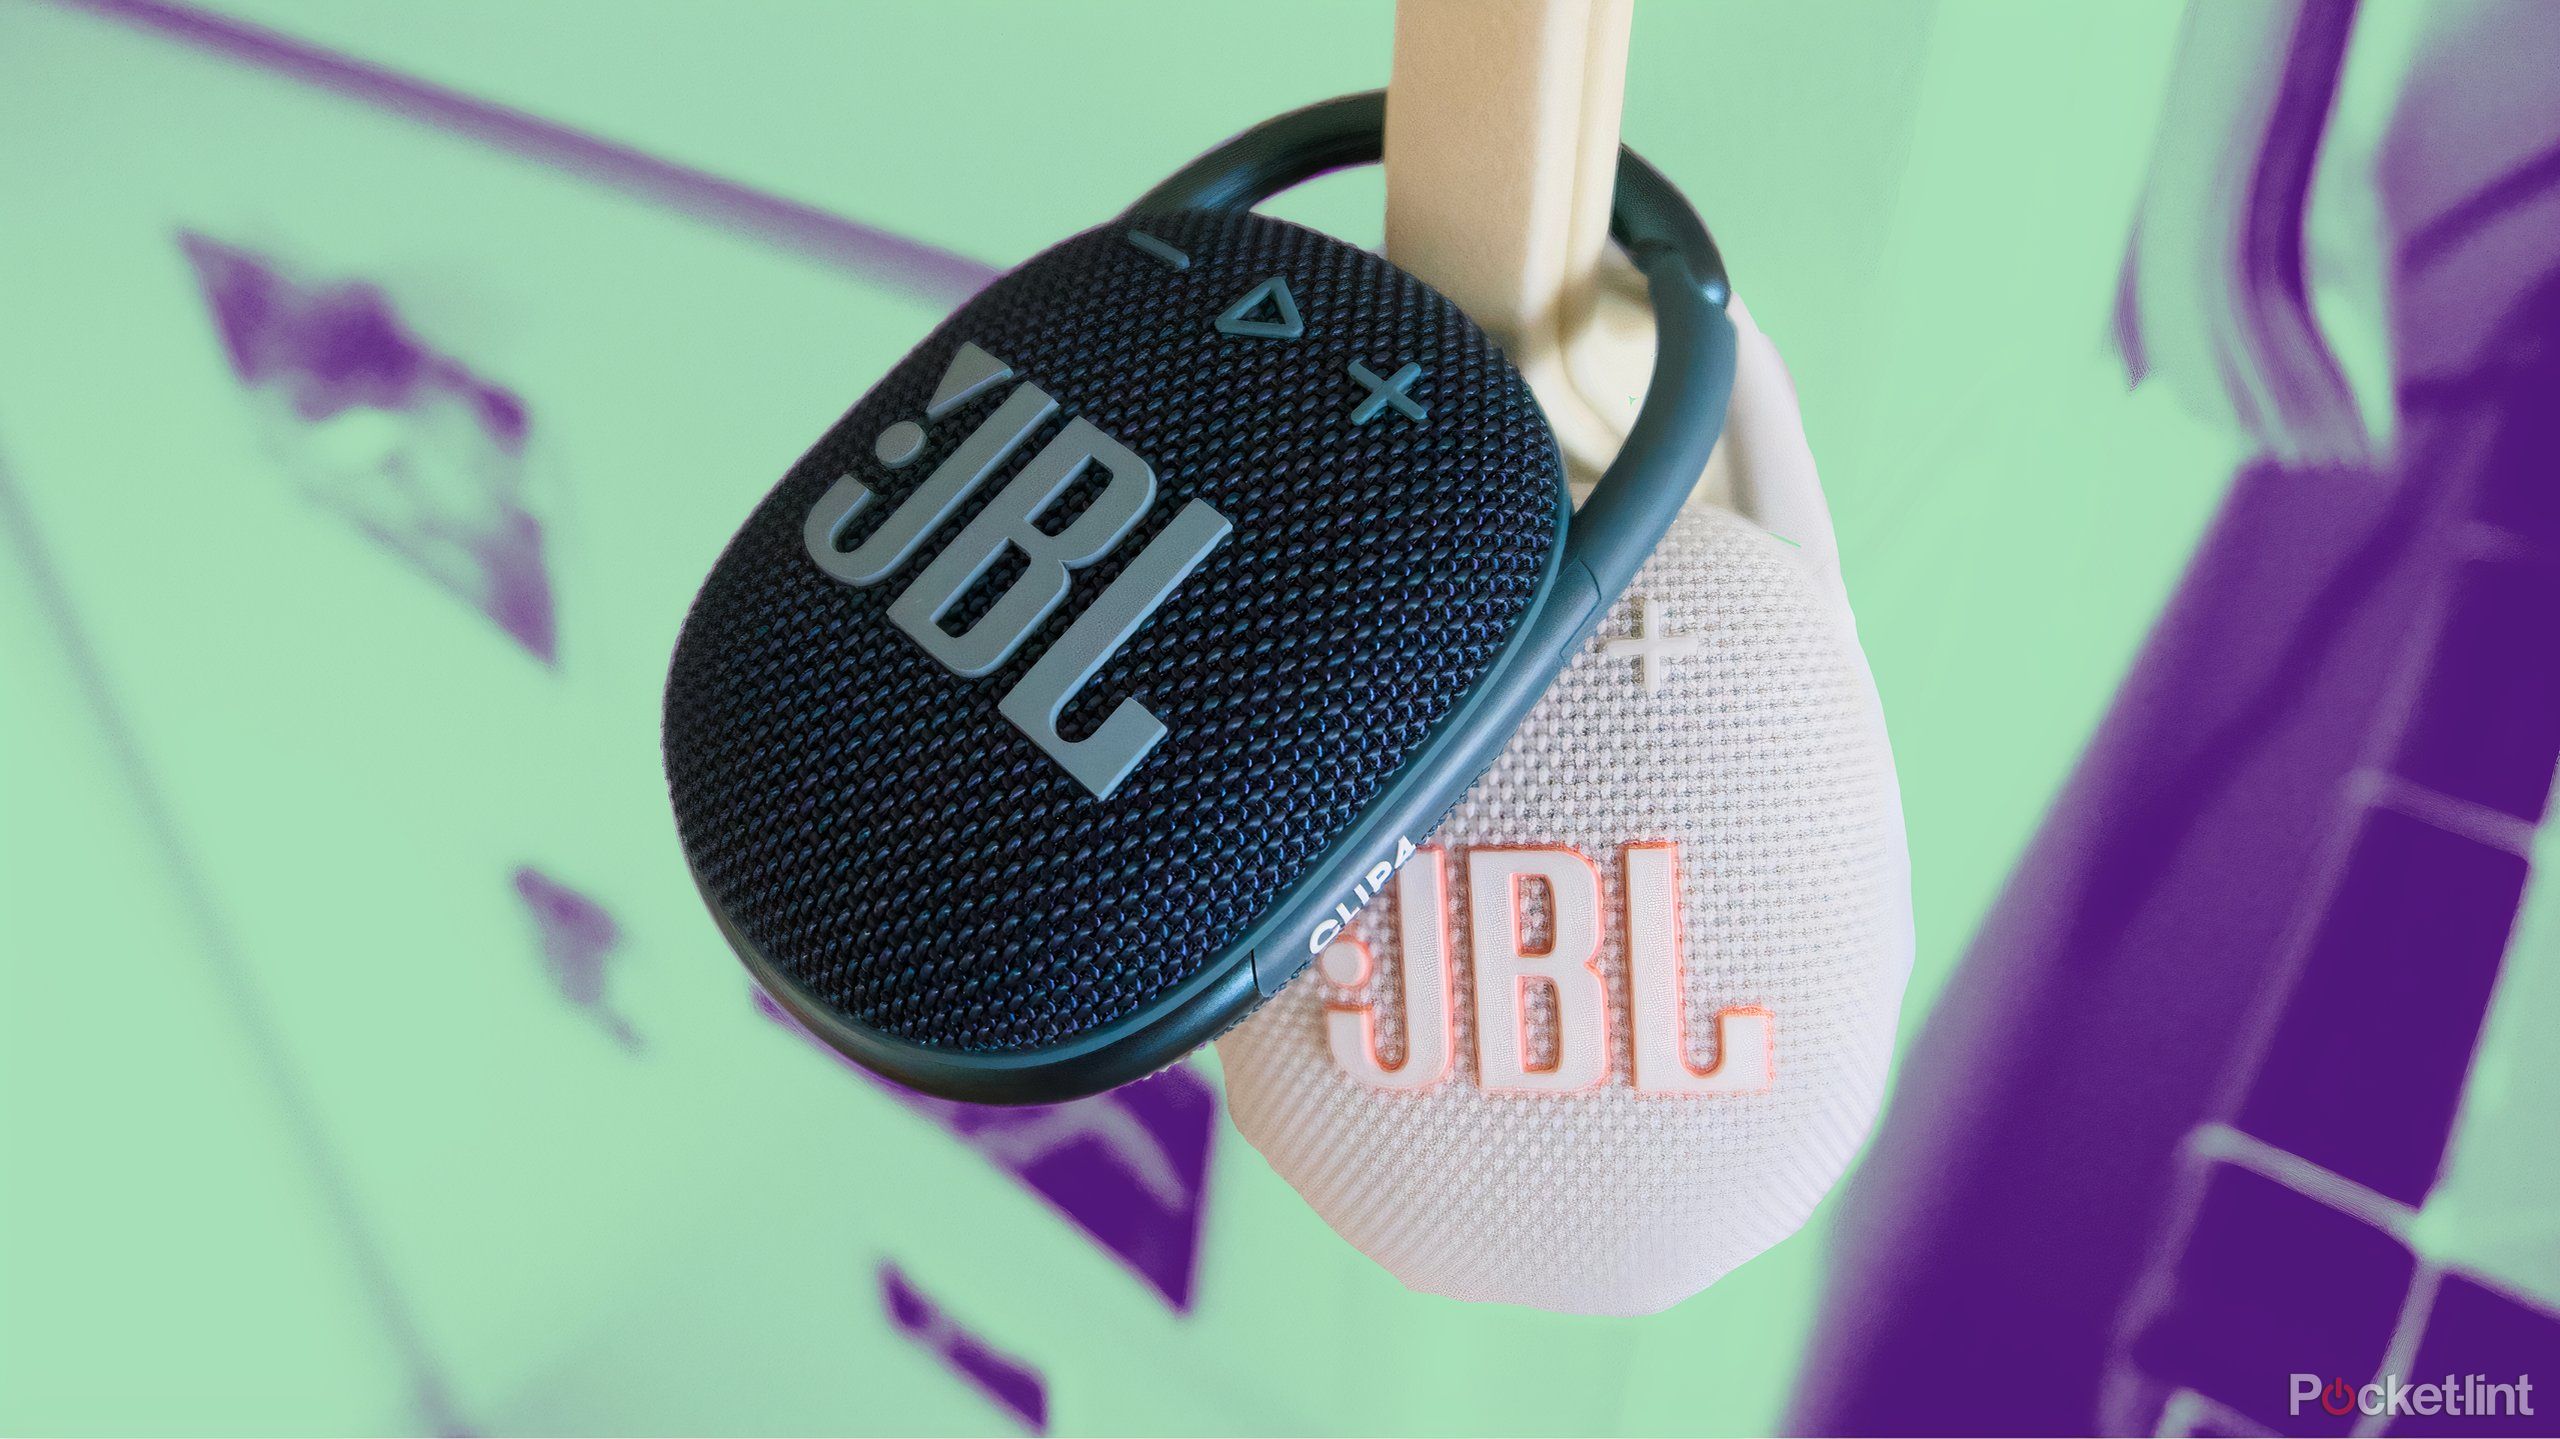 3 reasons to buy the JBL Clip 4 over the JBL Clip 5